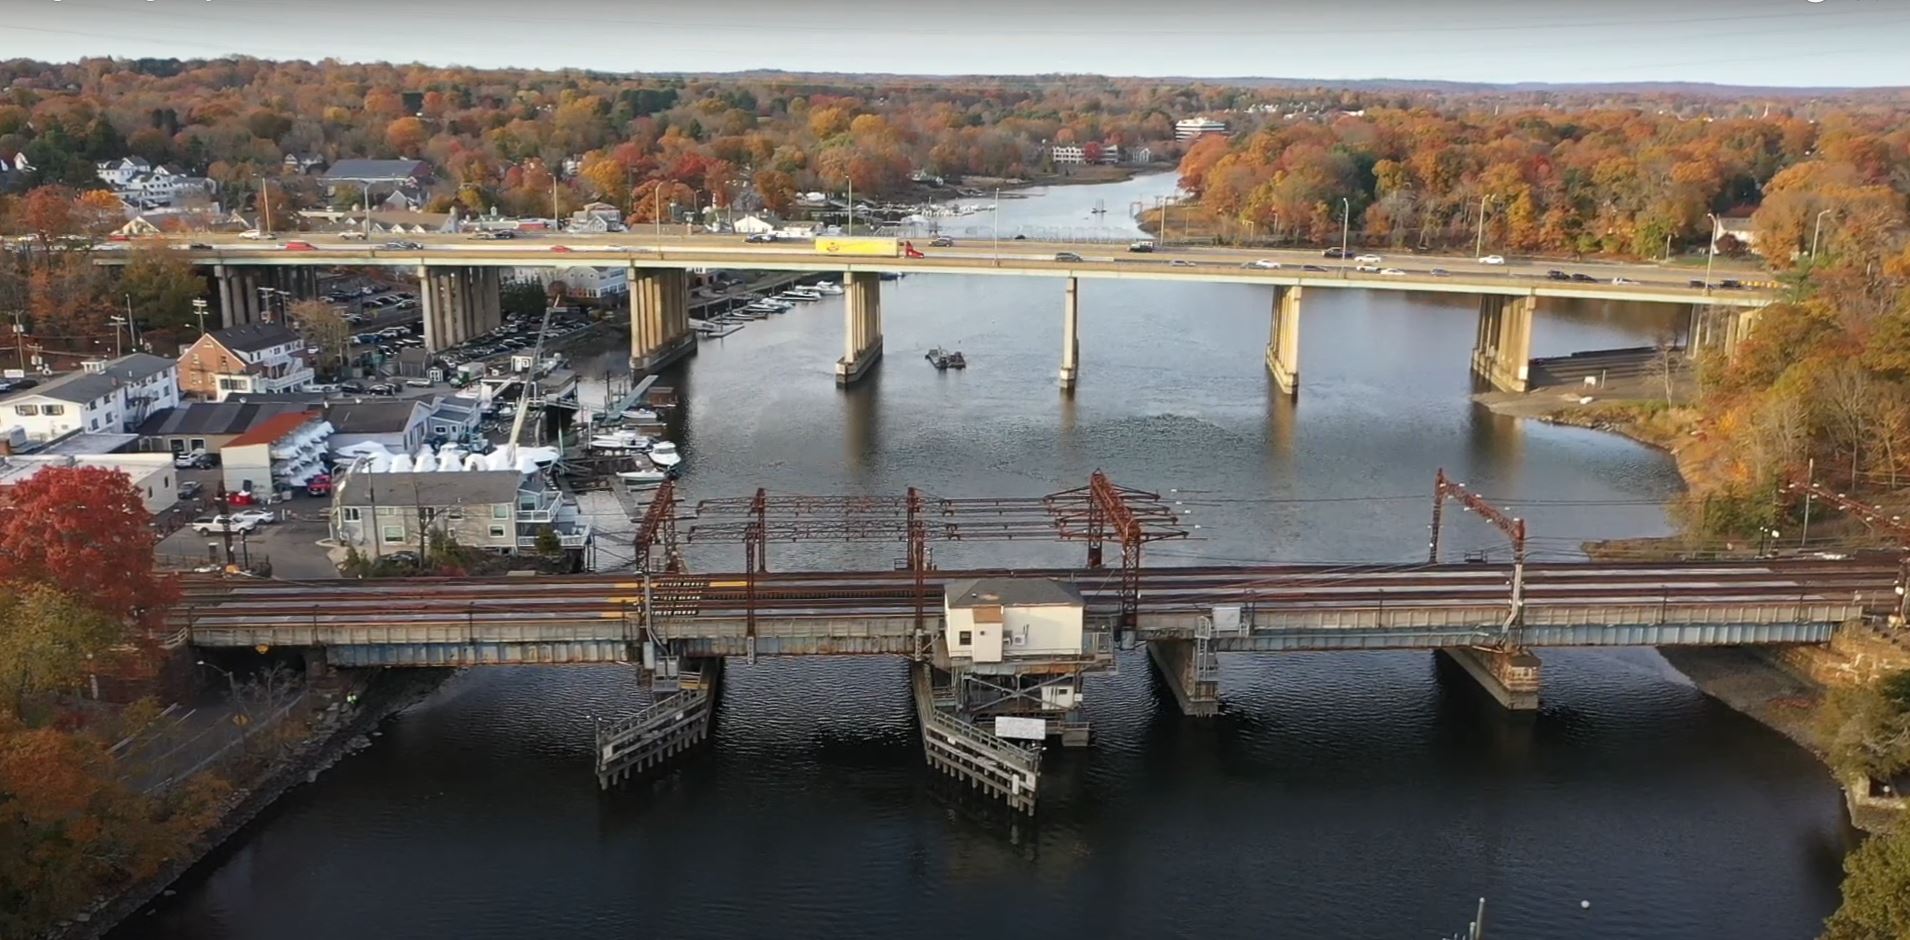 Aerial photo of the Saugatuck River Railroad Bridge looking north over Saugatuck River with I-95 highway bridge in background.